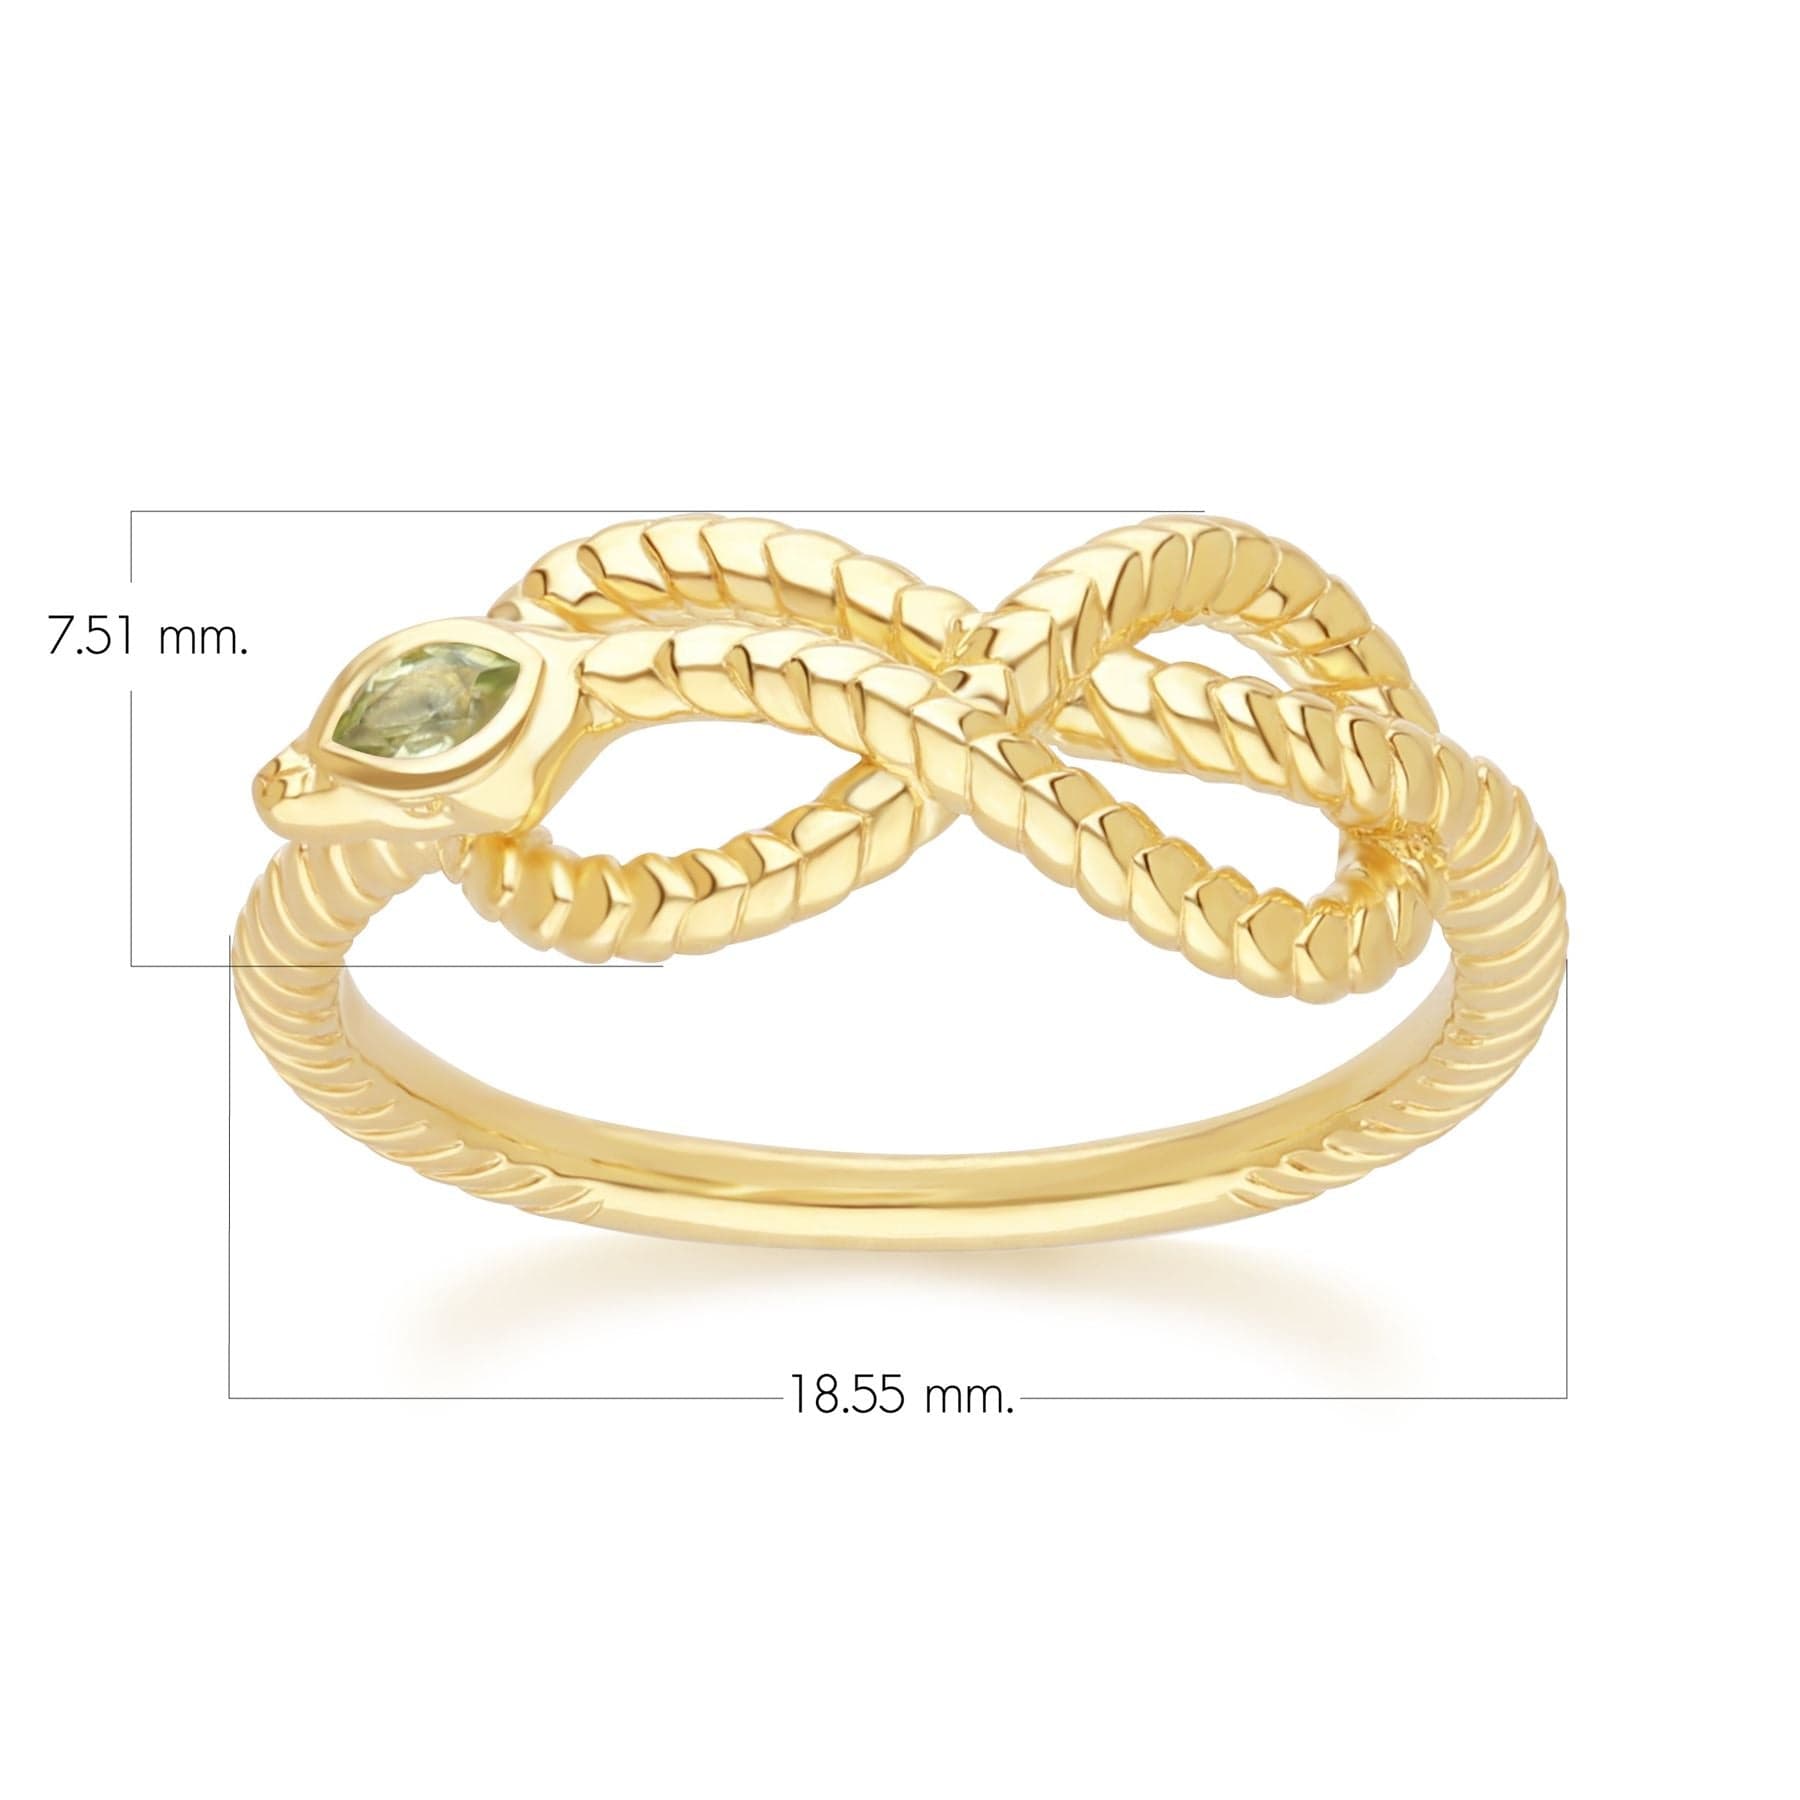 253R723503925 ECFEW™ Peridot Winding Snake Ring in Gold Plated Sterling Silver